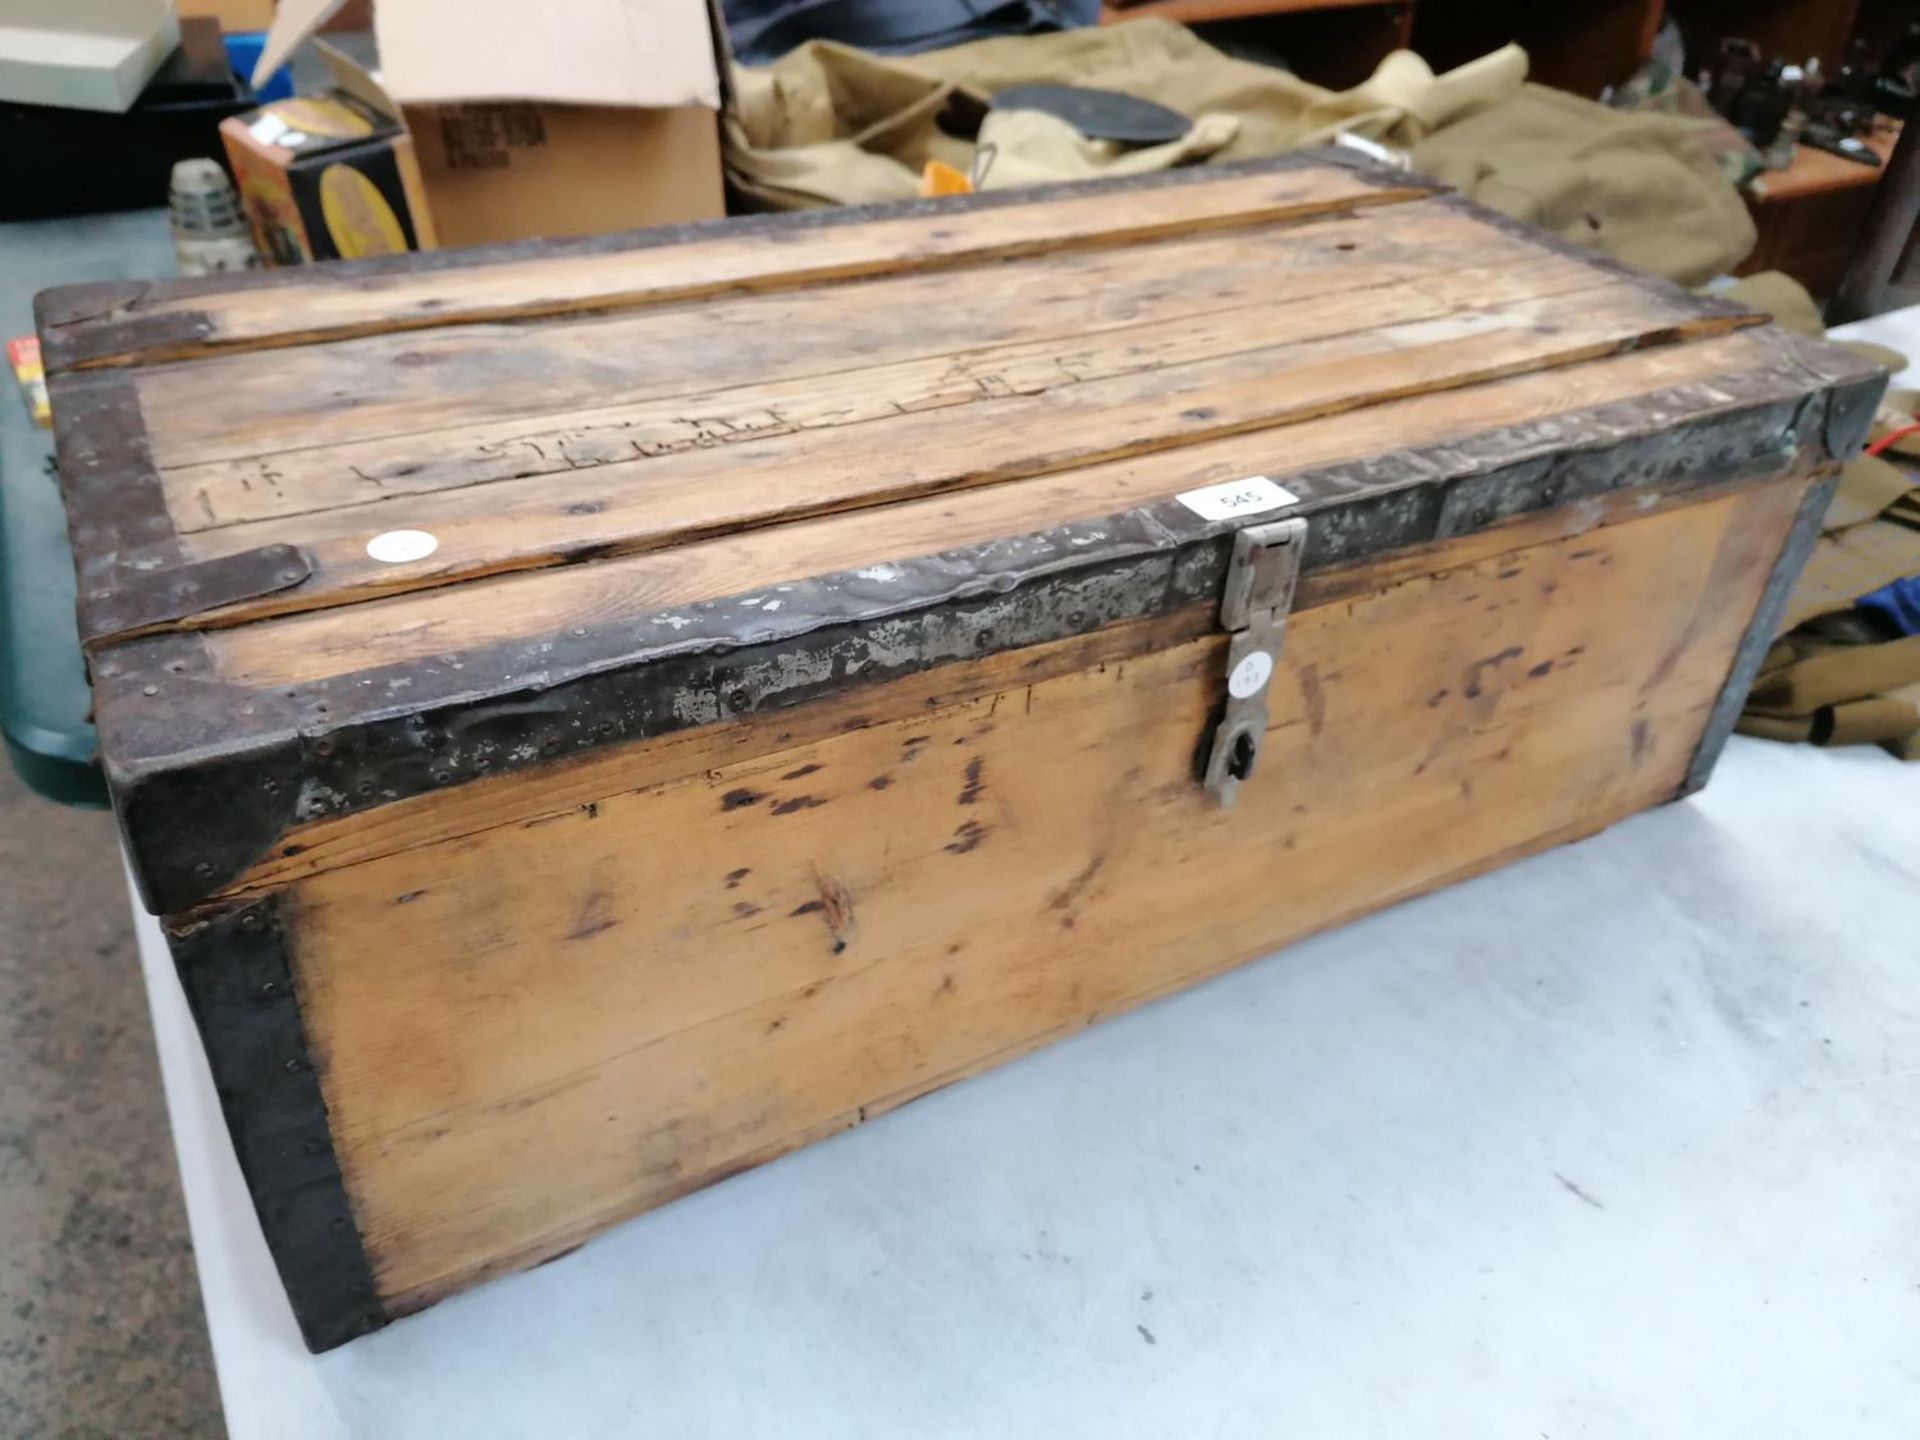 A VINTAGE FRENCH OAK GUN AMMO CHEST WITH METAL BANDING AND TWO METAL SIDE HANDLES